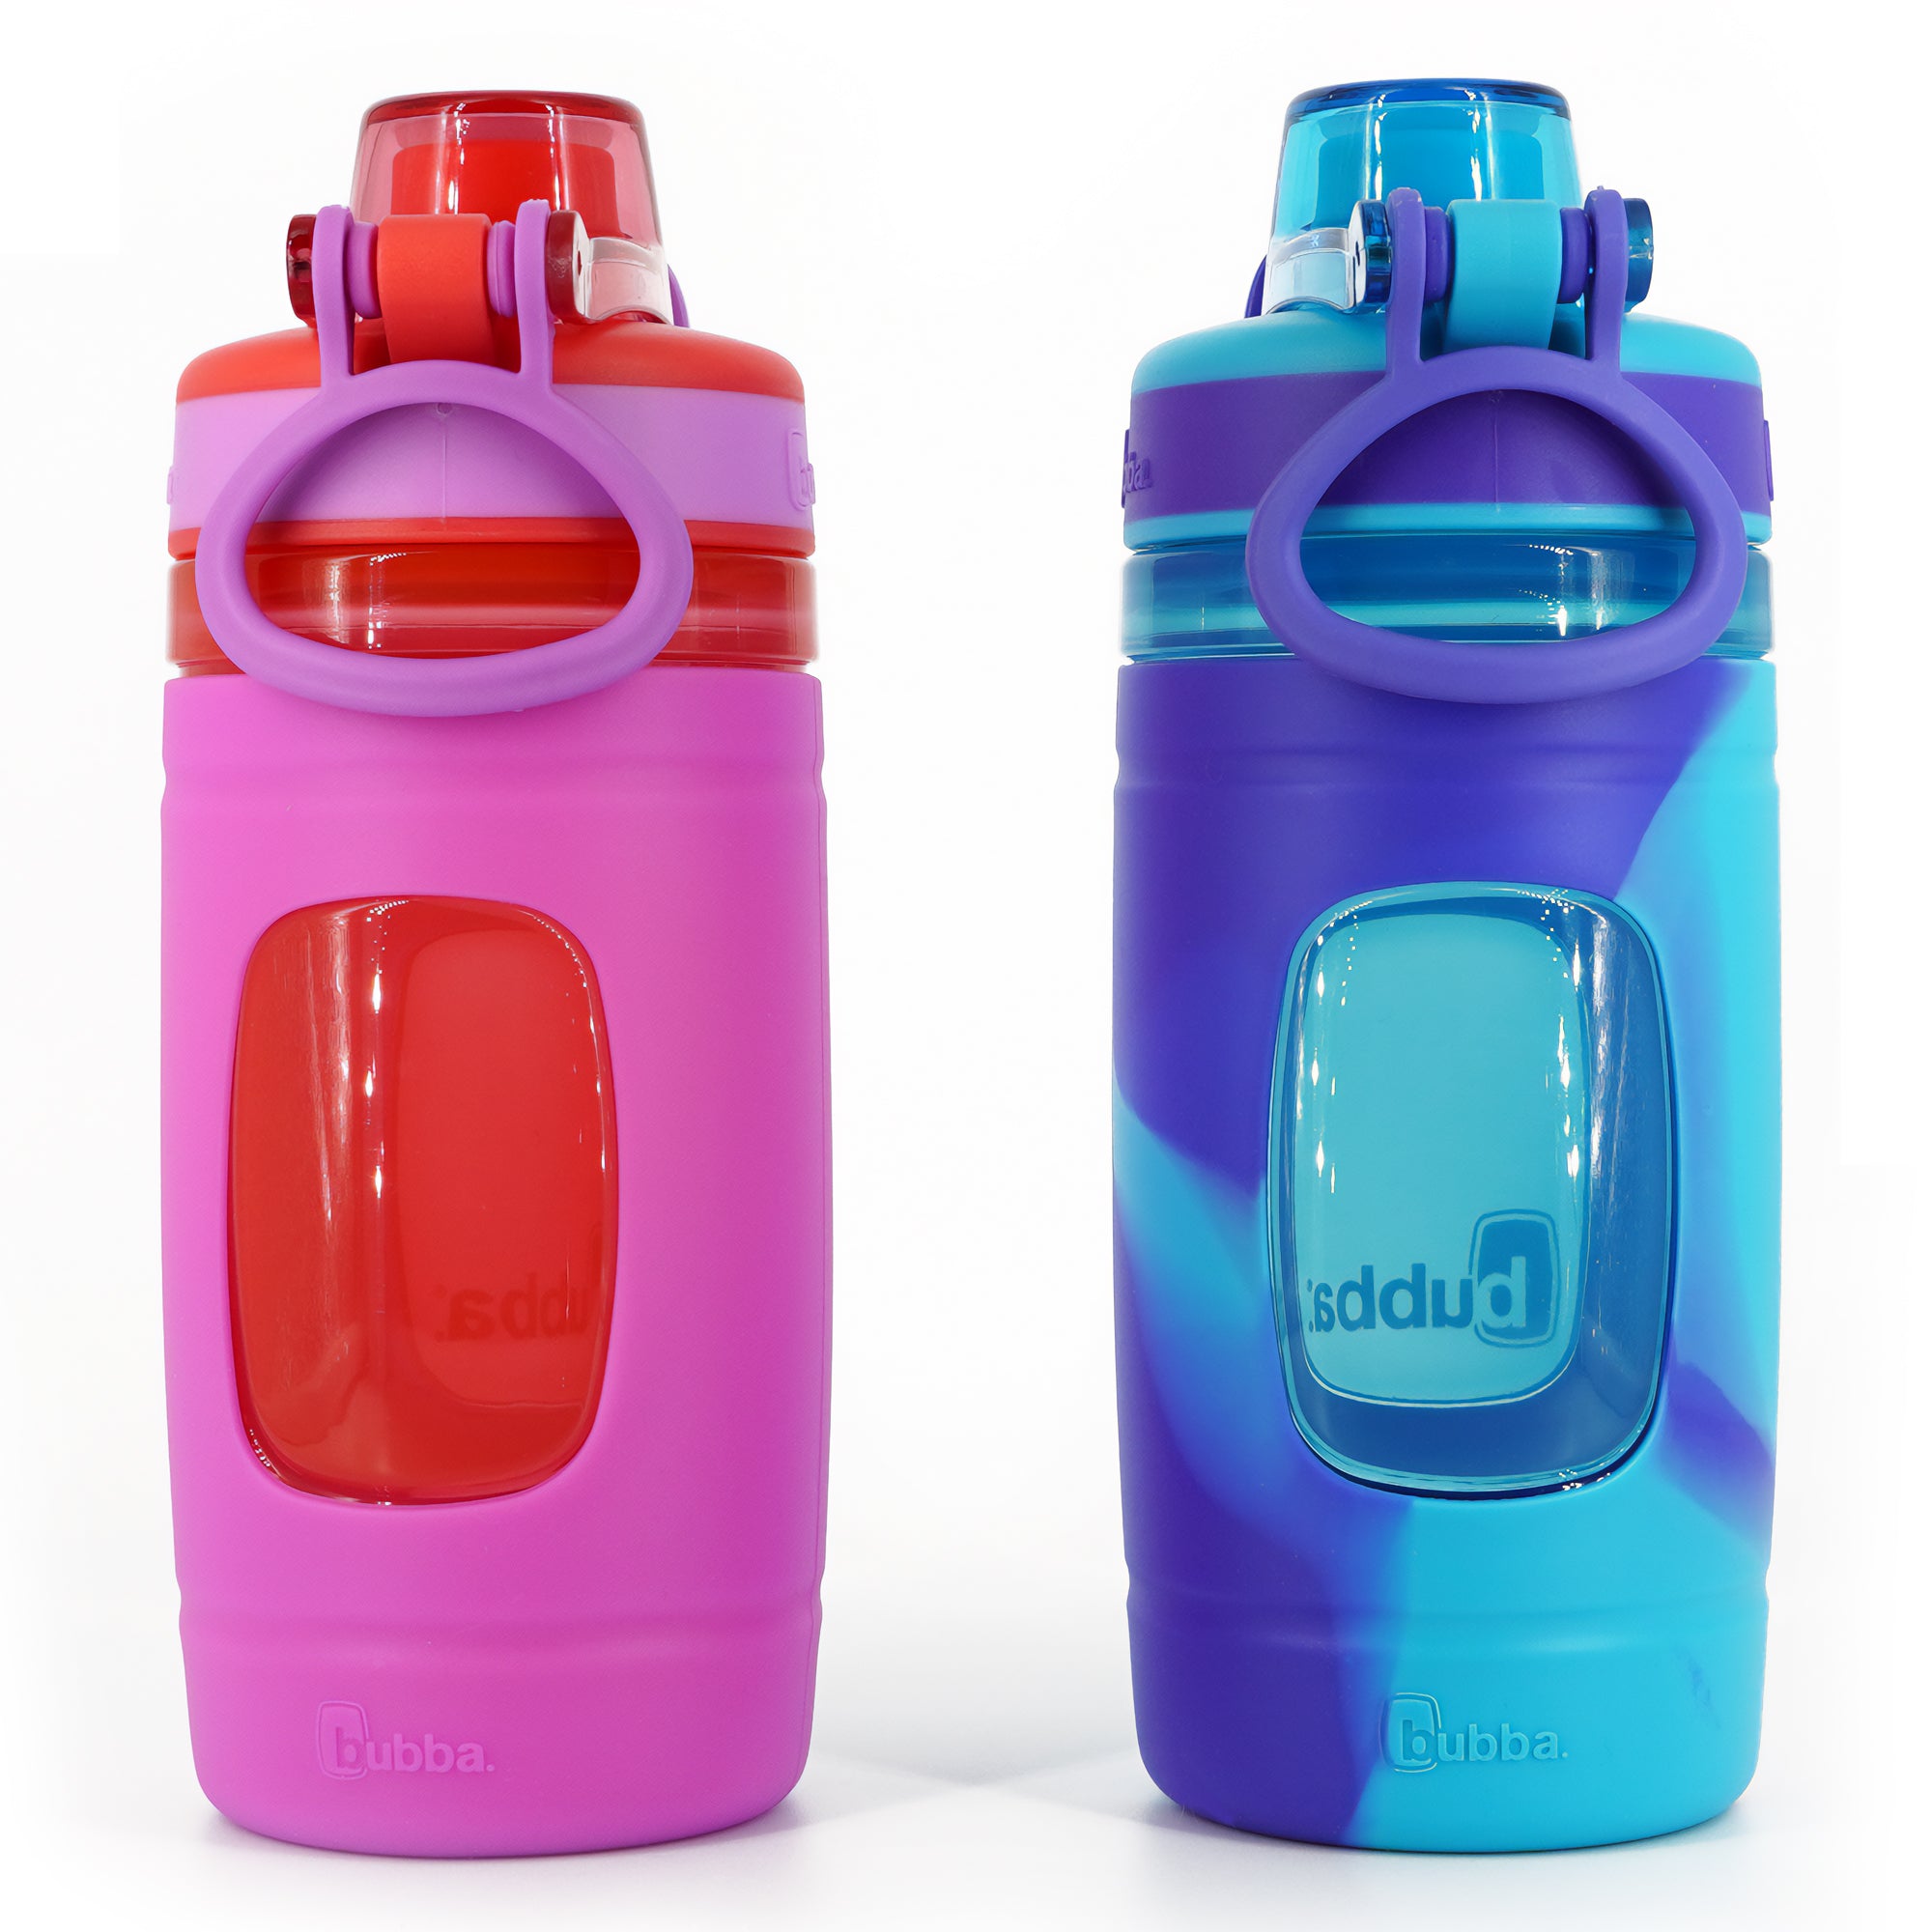 Bubba 16oz Flo Plastic Kids Water Bottle with Silicone Sleeve Blue and Gray  1 ct